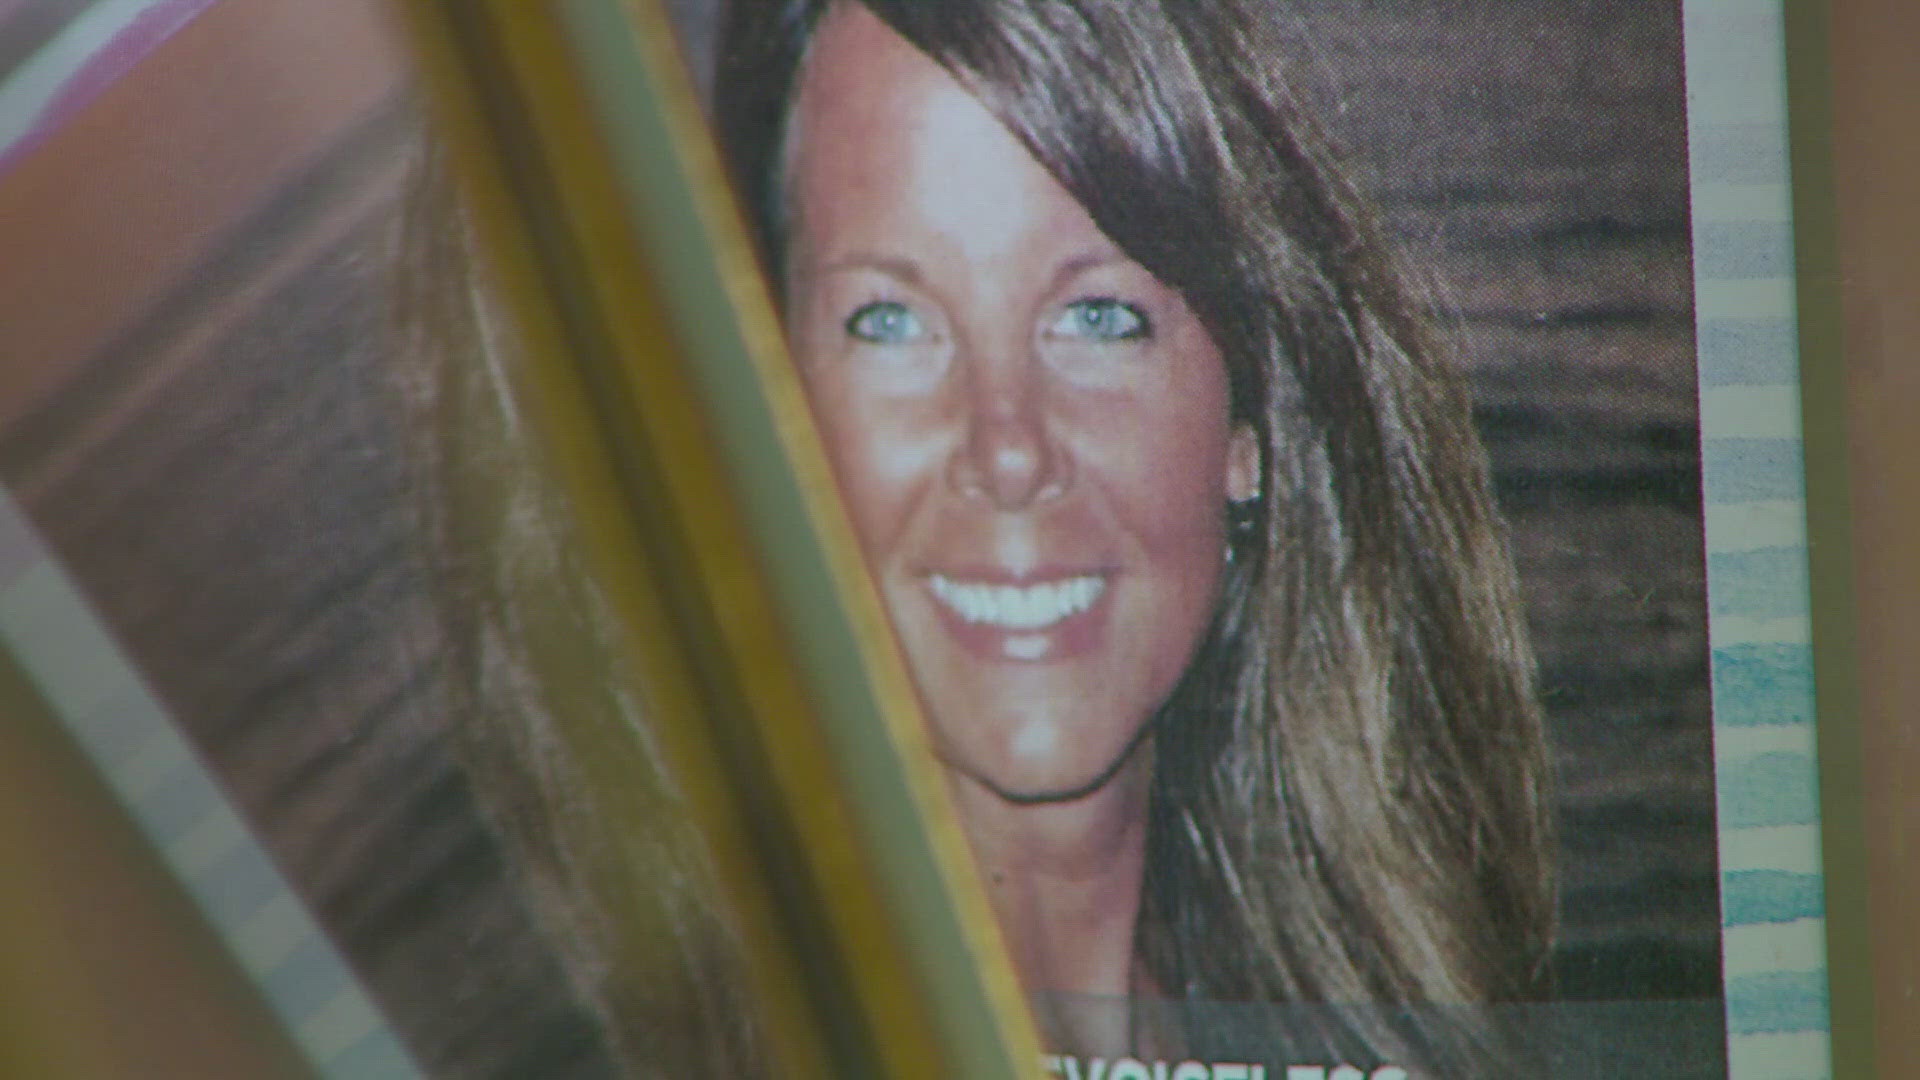 Mother's Day marks four years since Suzanne Morphew disappeared from her home in Chaffee County.